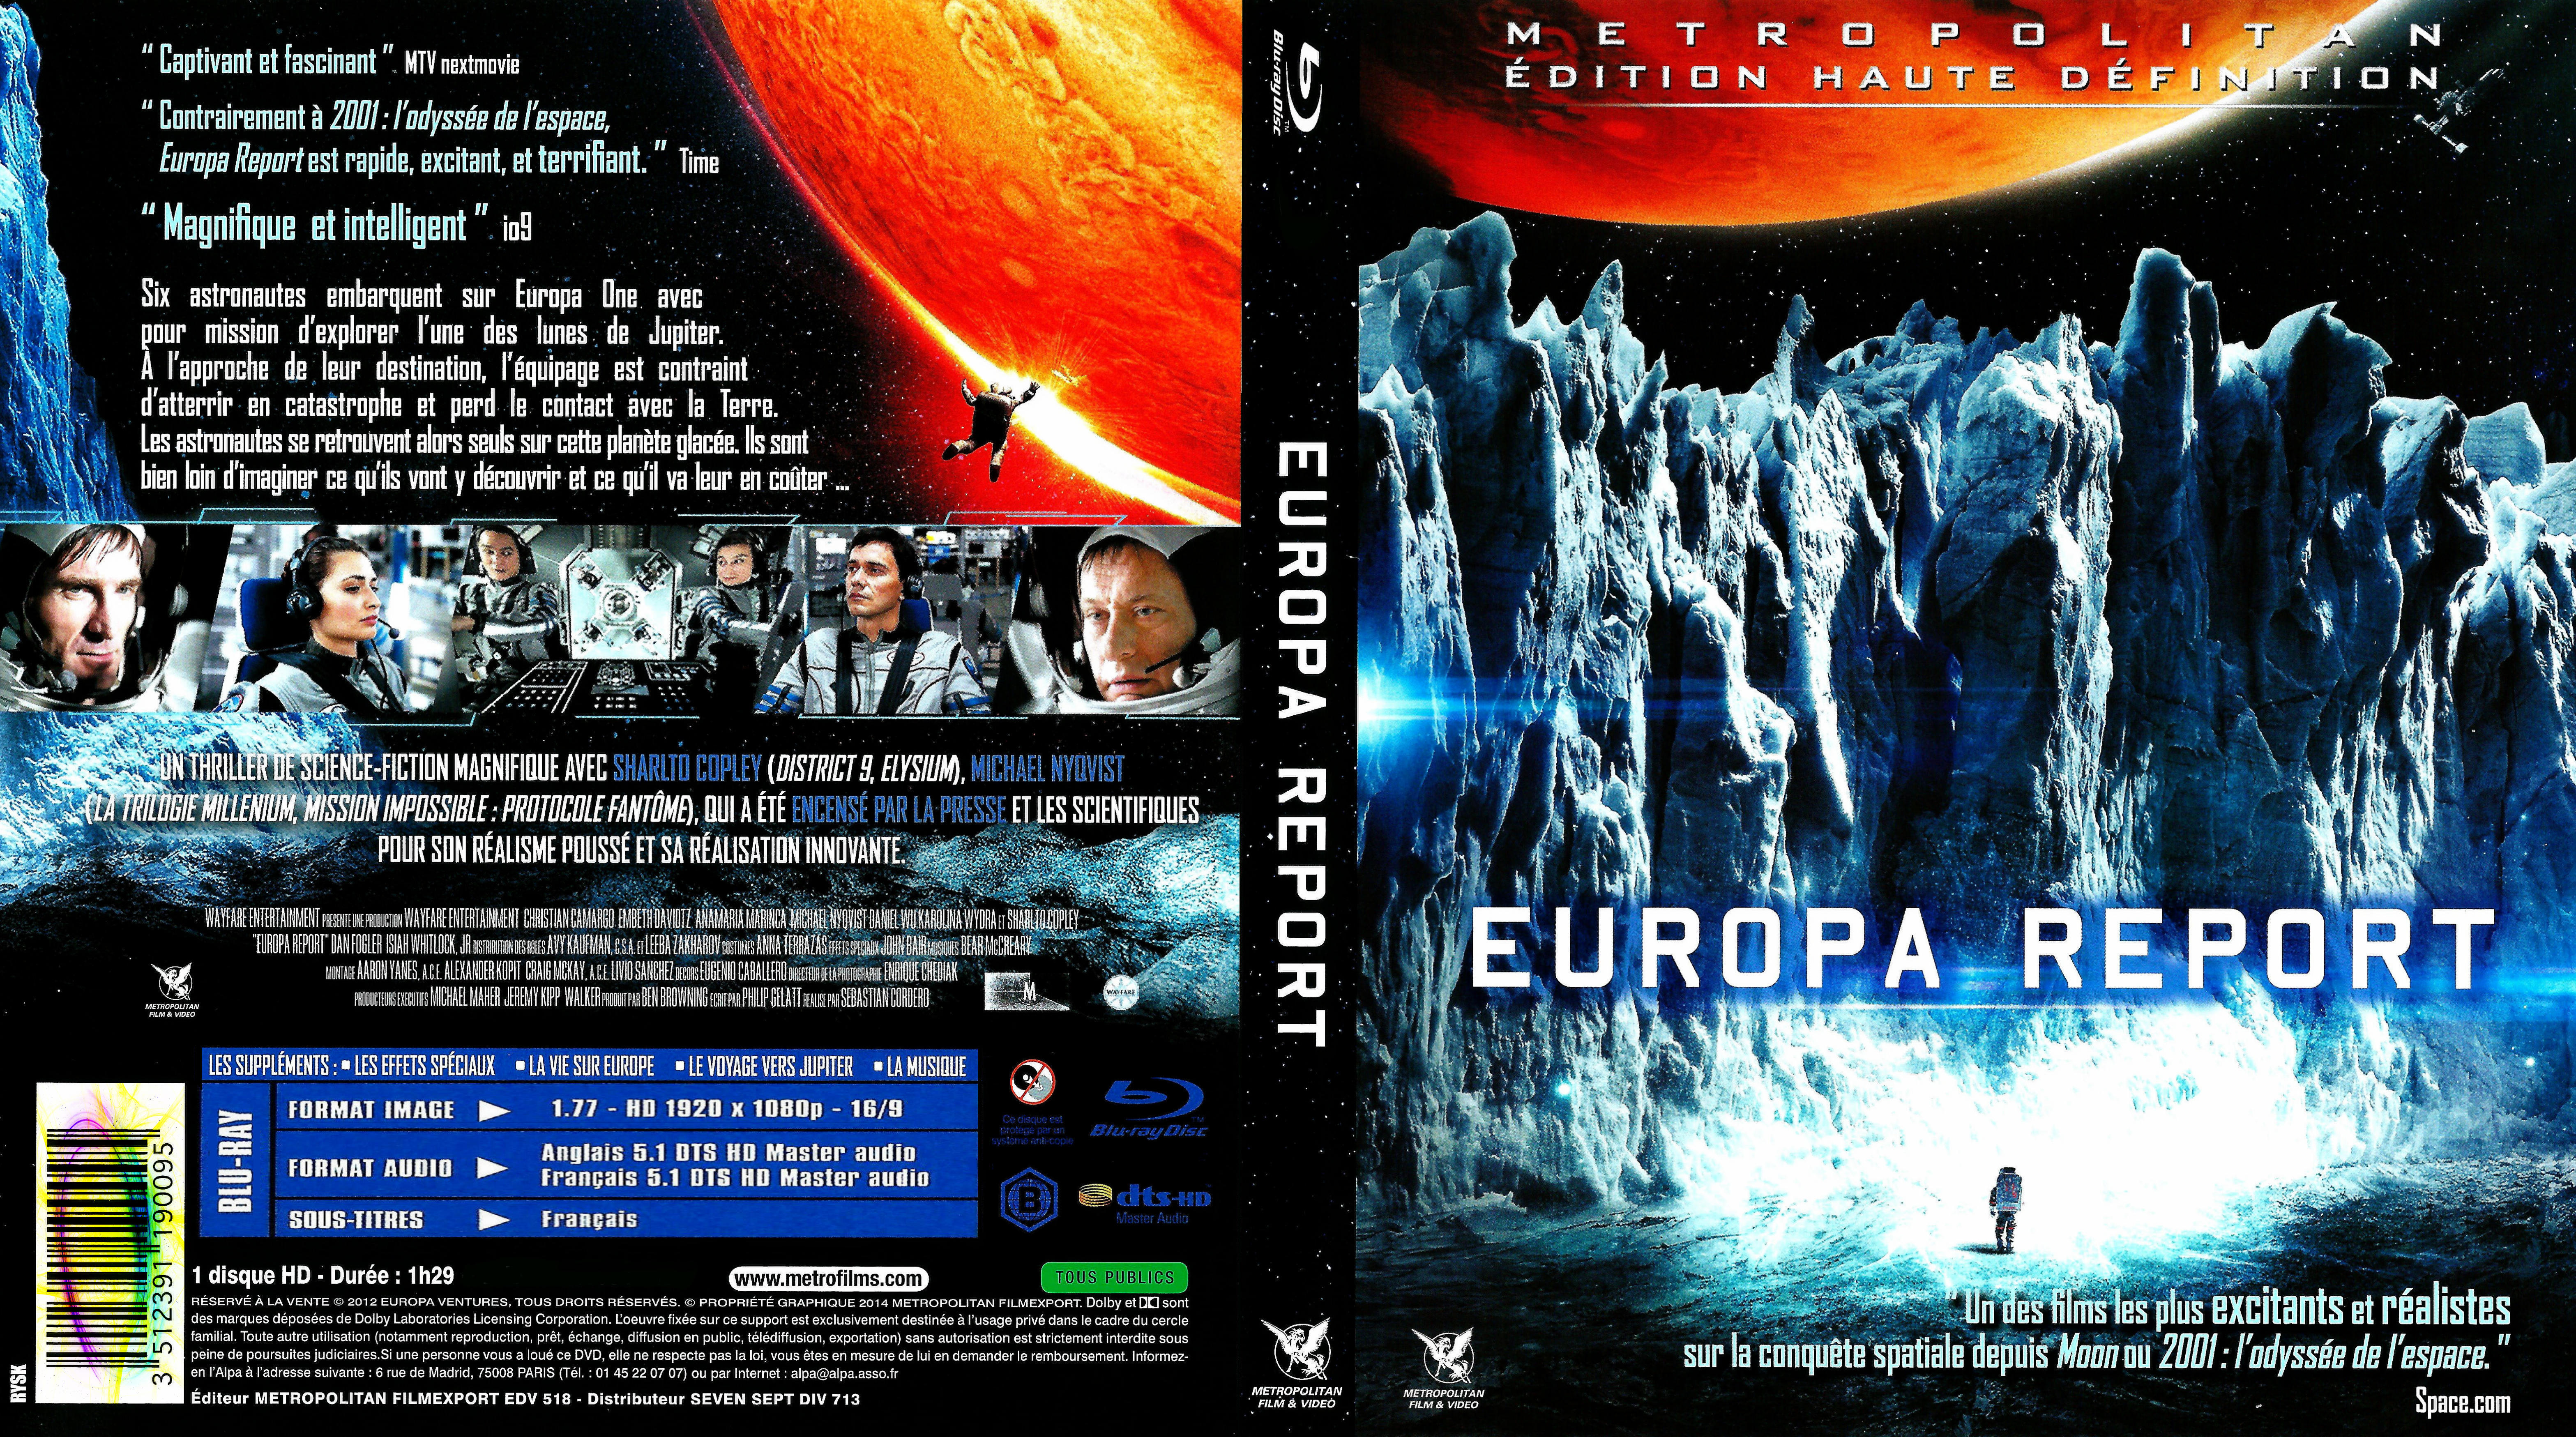 Jaquette DVD Europa report (BLU-RAY) v2